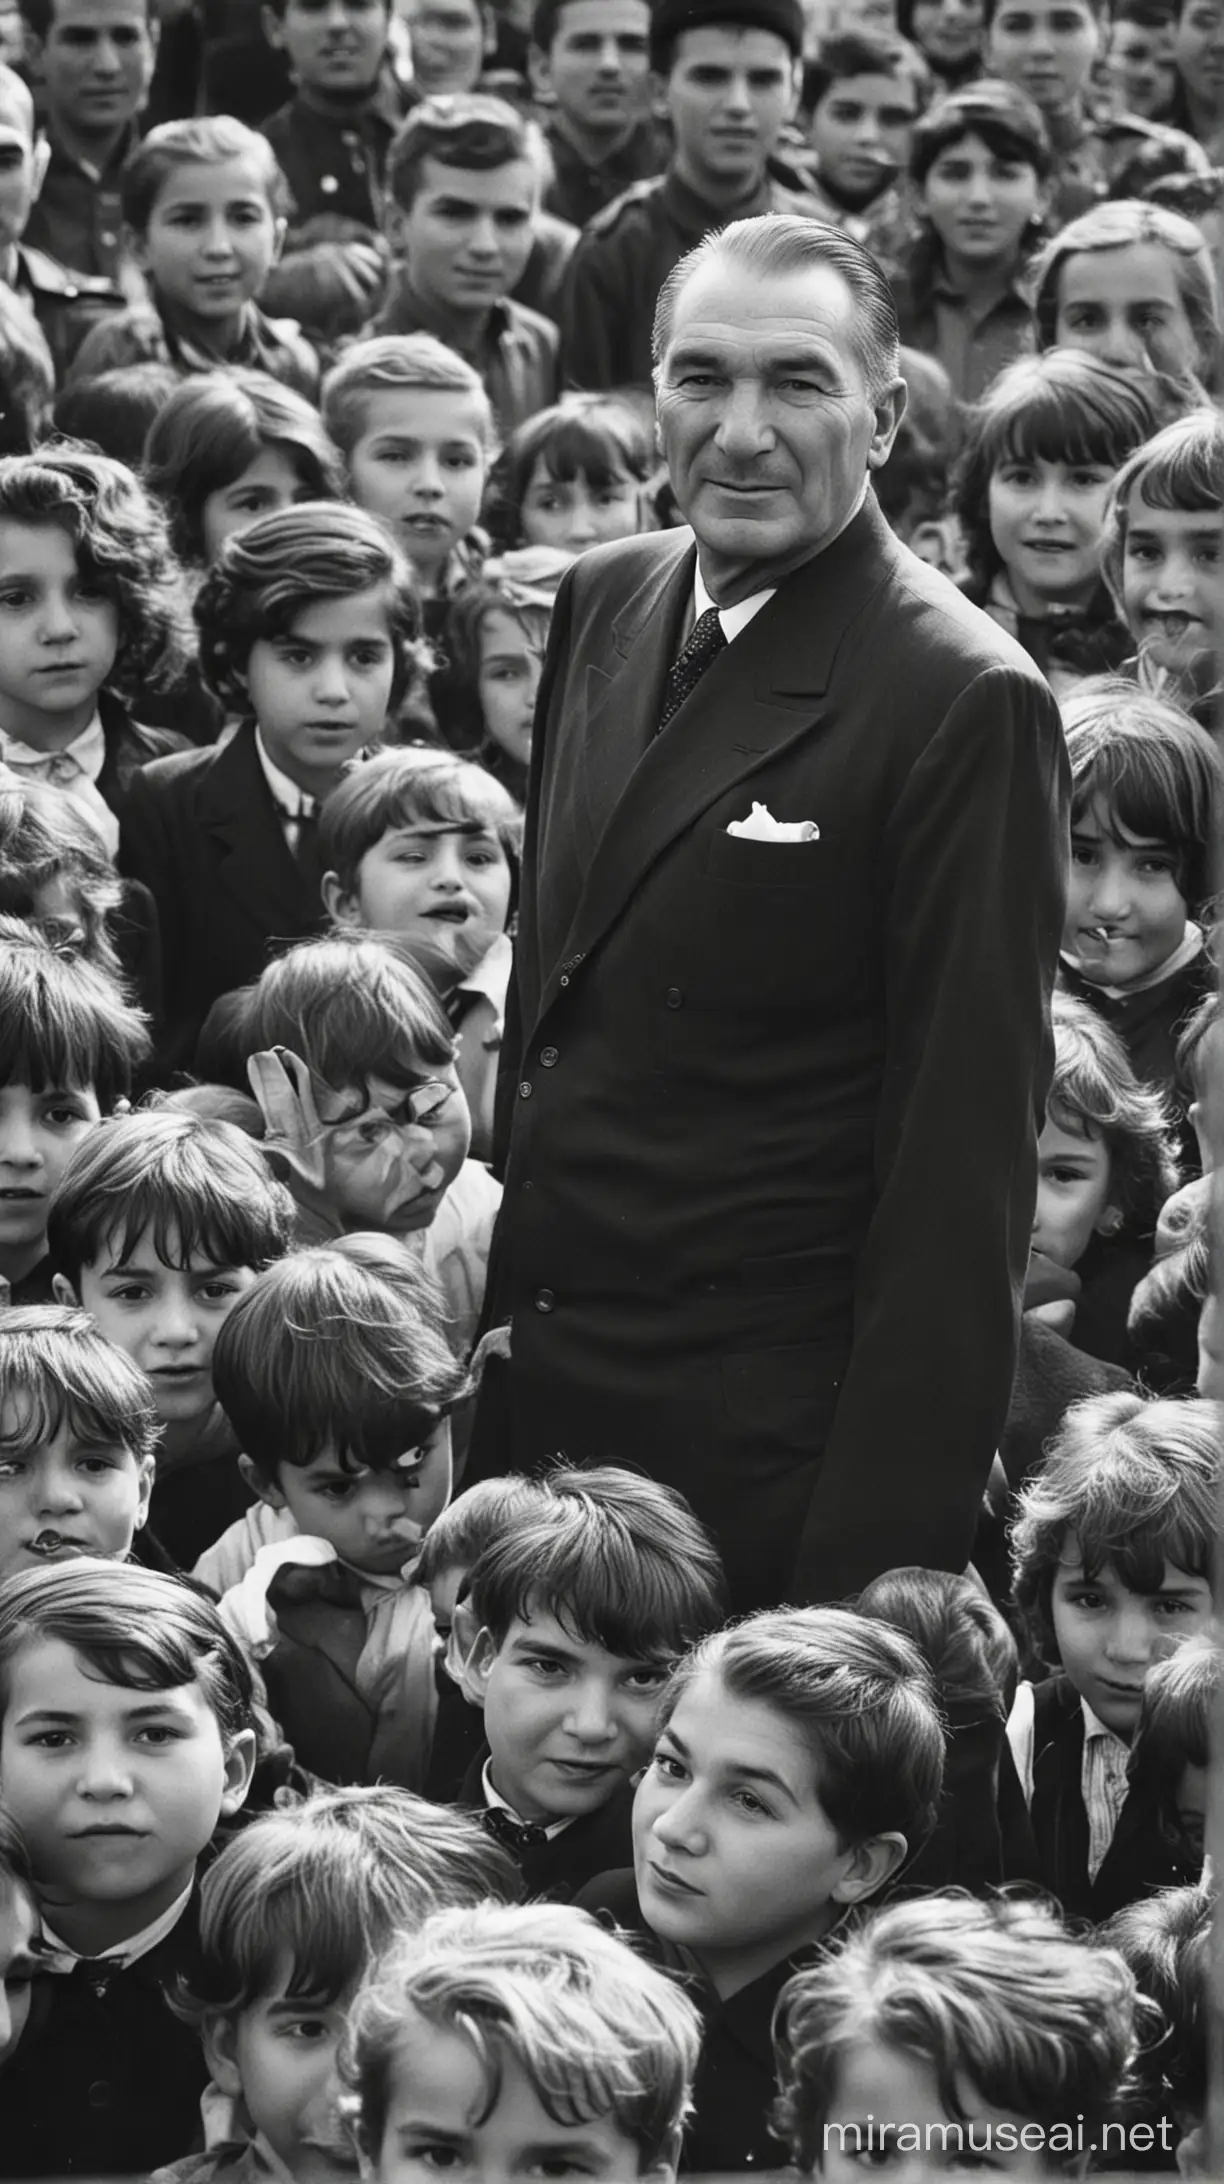 Atatürk, who is looking through the children.